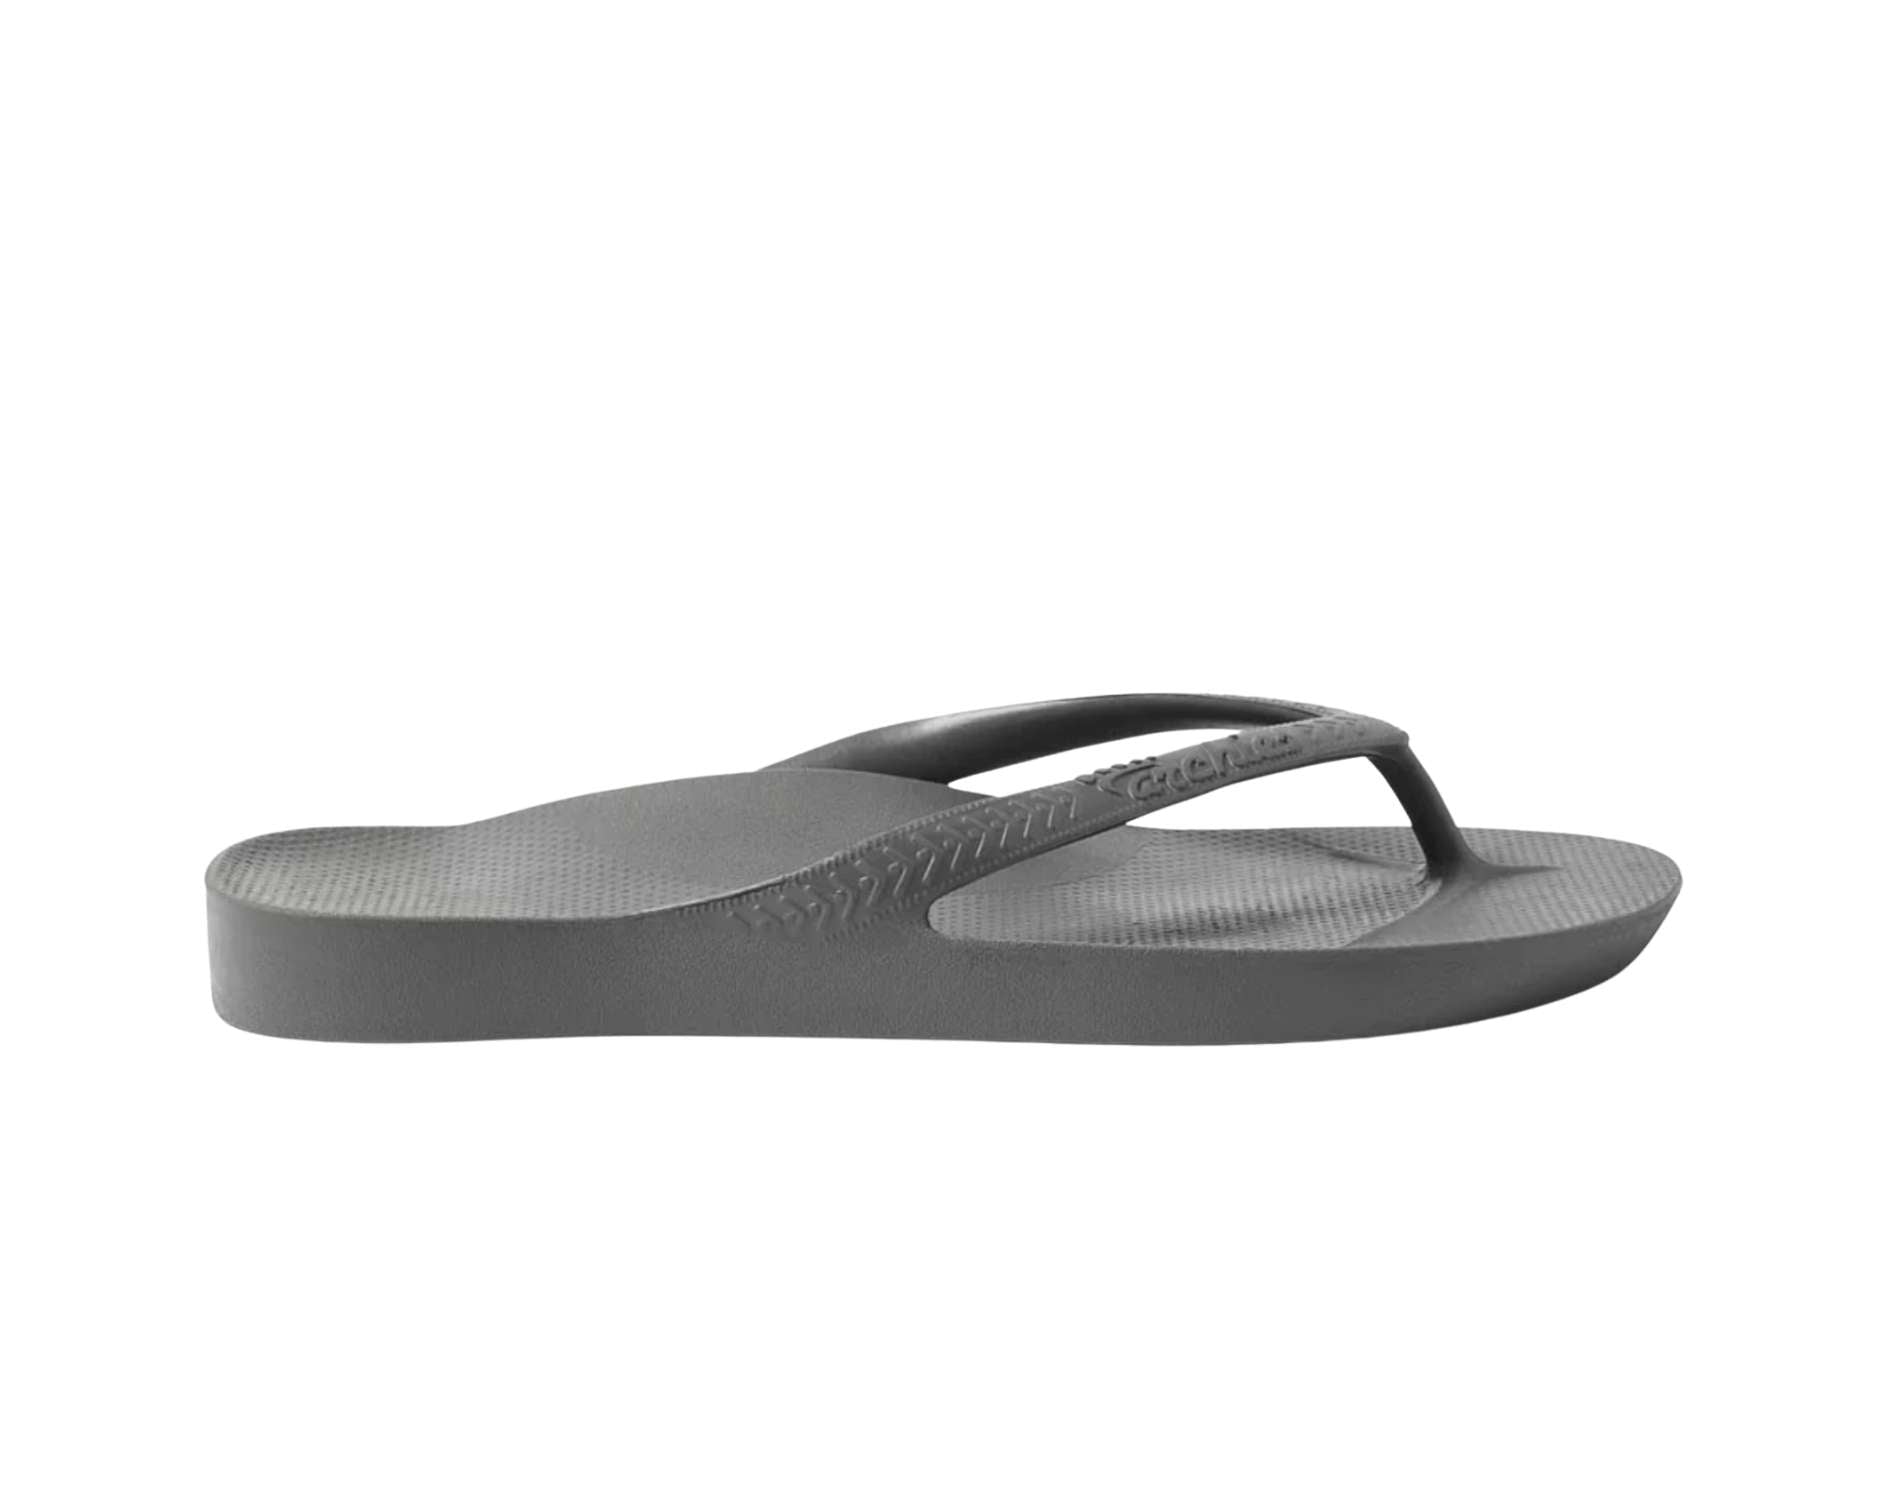 Archie arch support thongs in charcoal colour